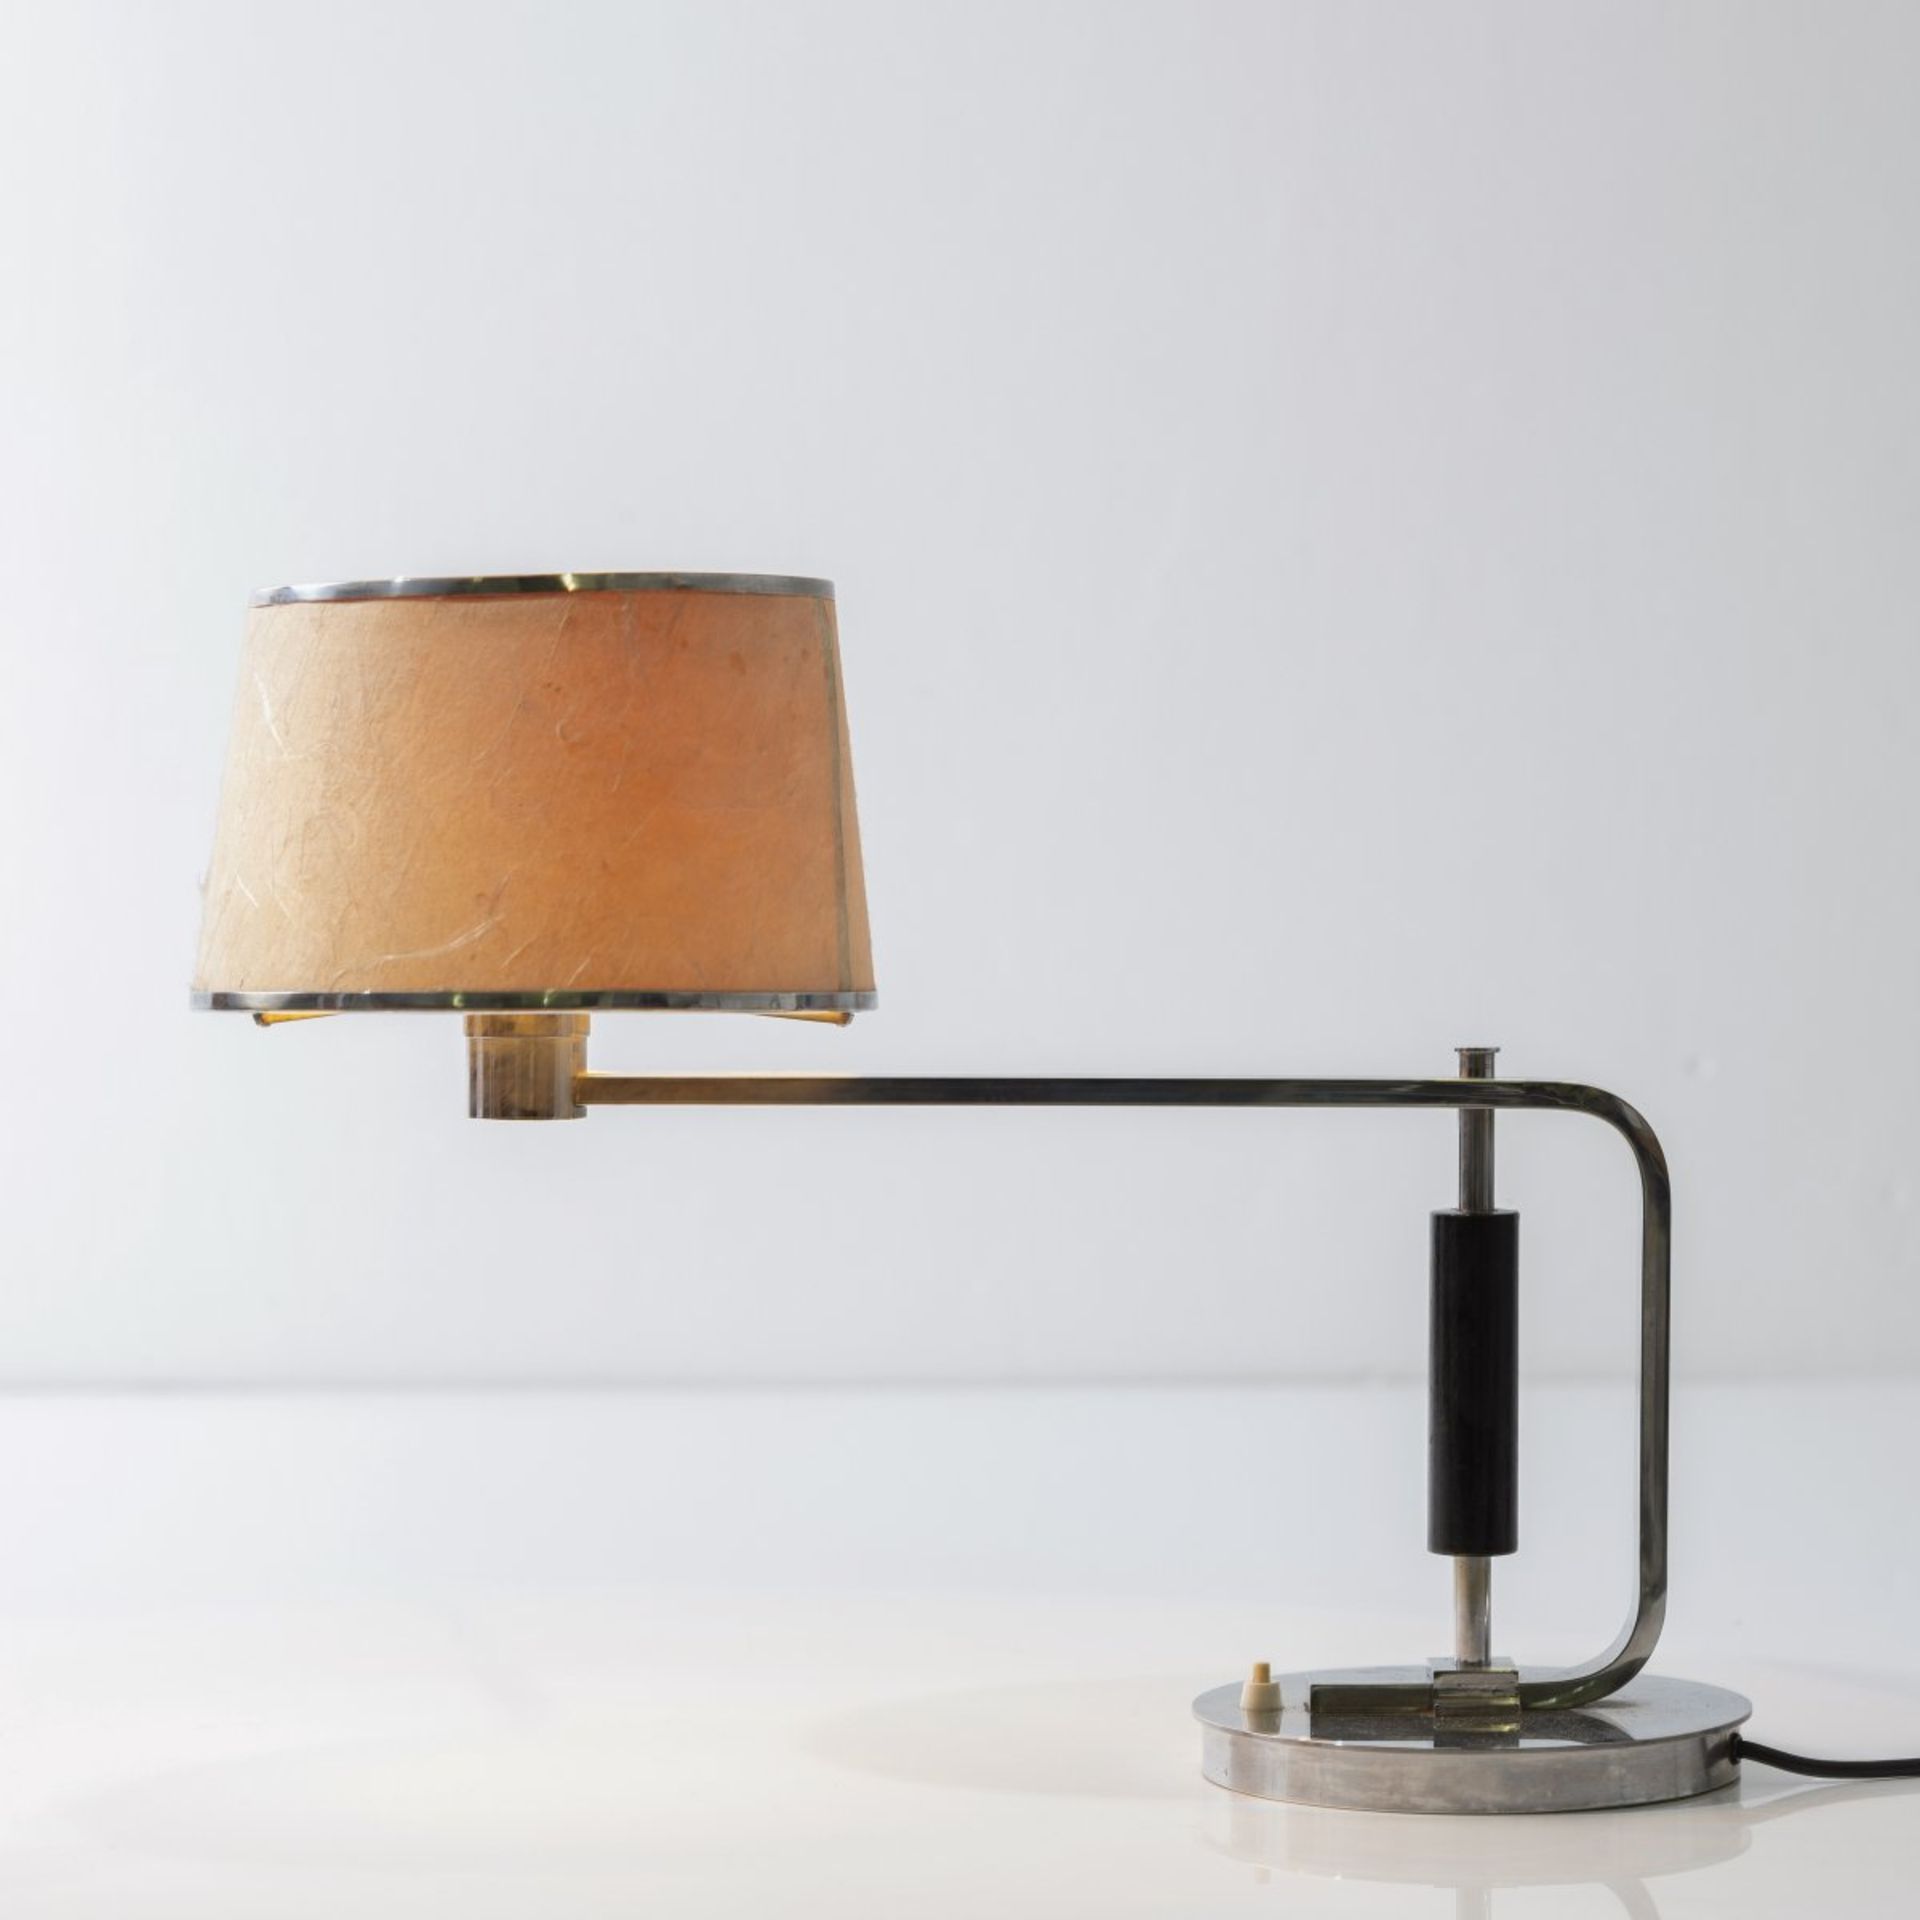 Germany, Table light, 1930s